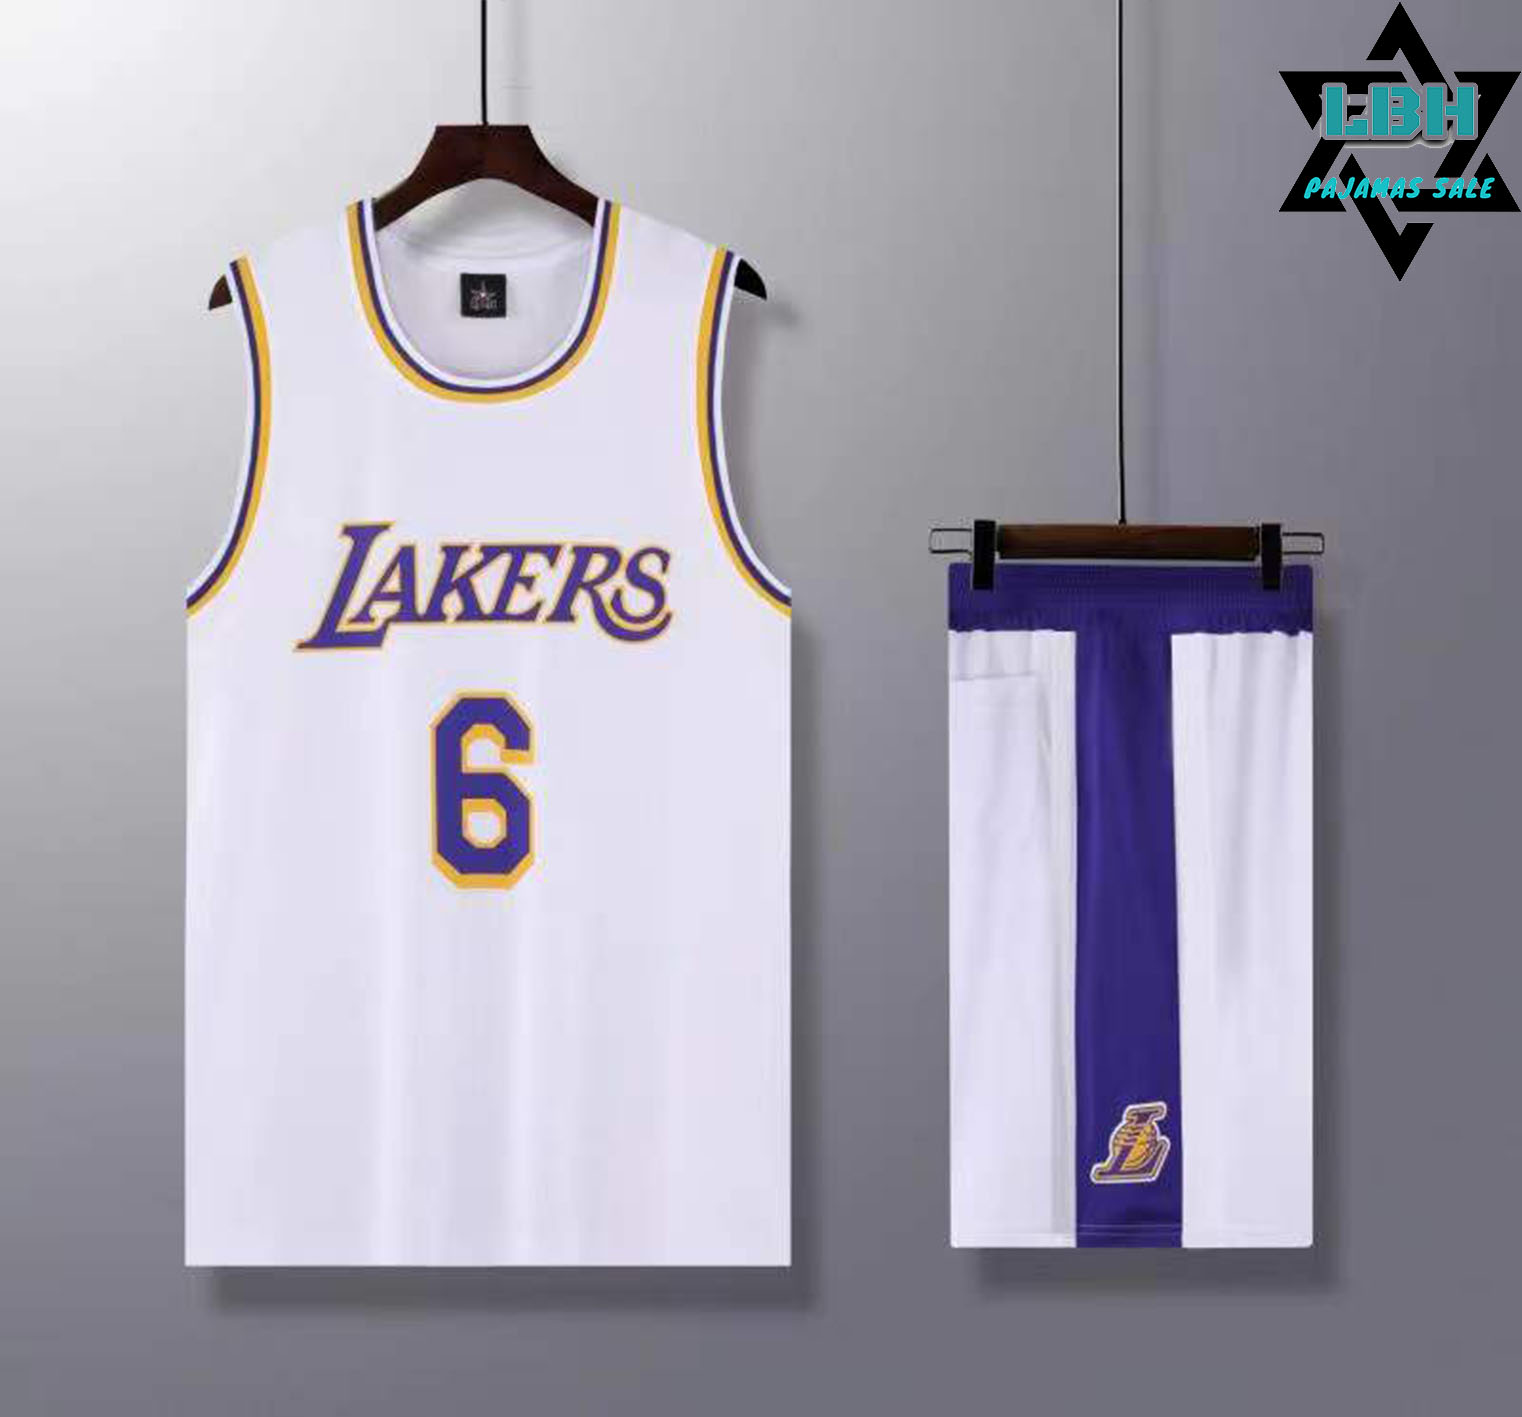 Lebron James #6 YOUTH Los Angeles Lakers jersey white